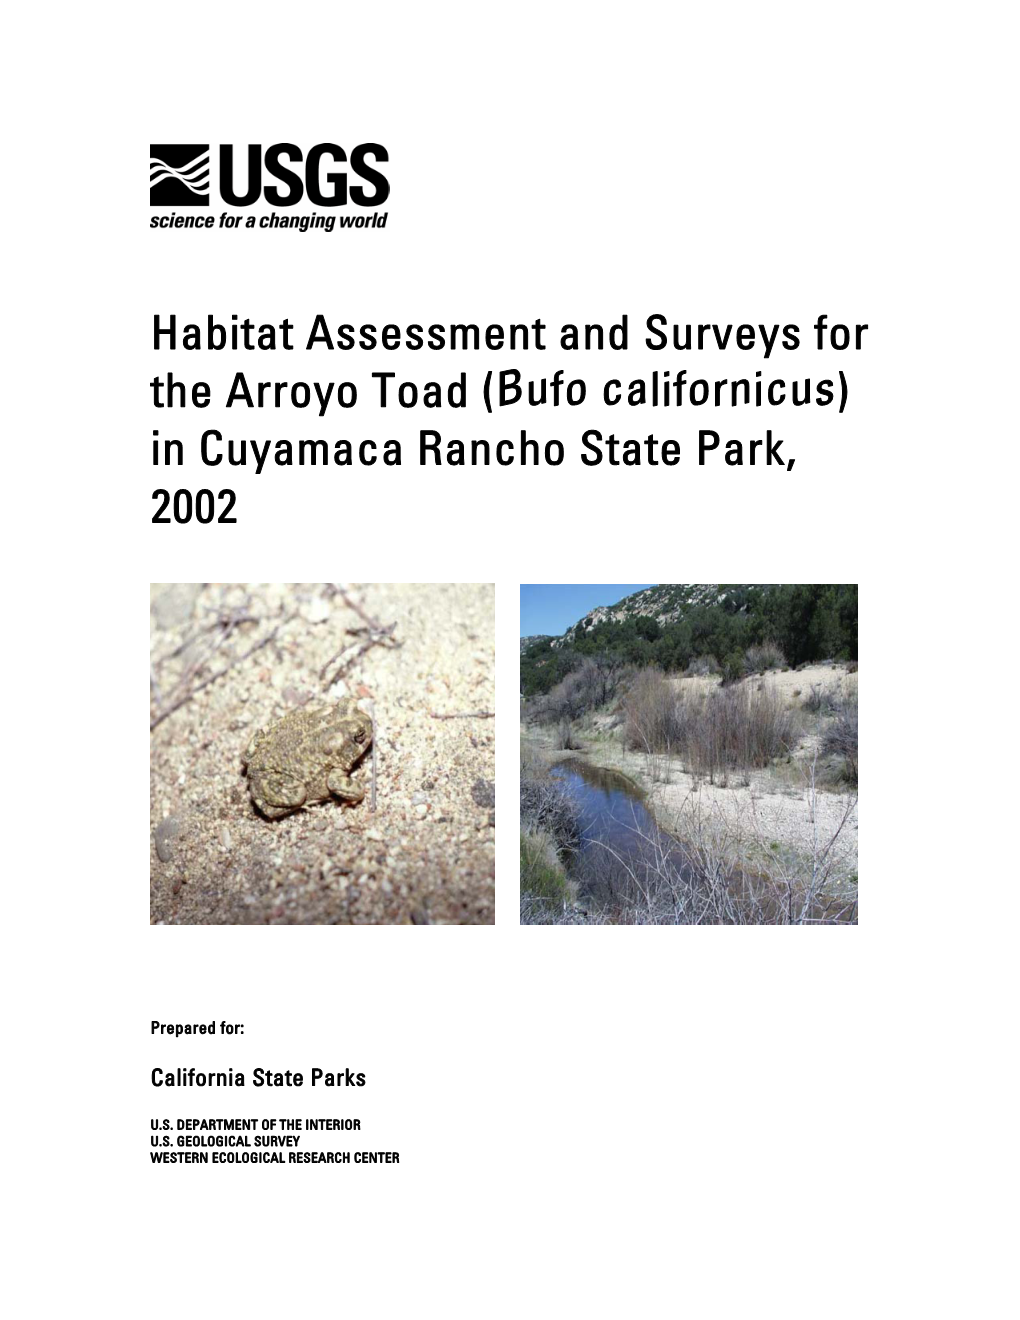 Habitat Assessment and Surveys for the Arroyo Toad (Bufo Californicus) in Cuyamaca Rancho State Park, 2002